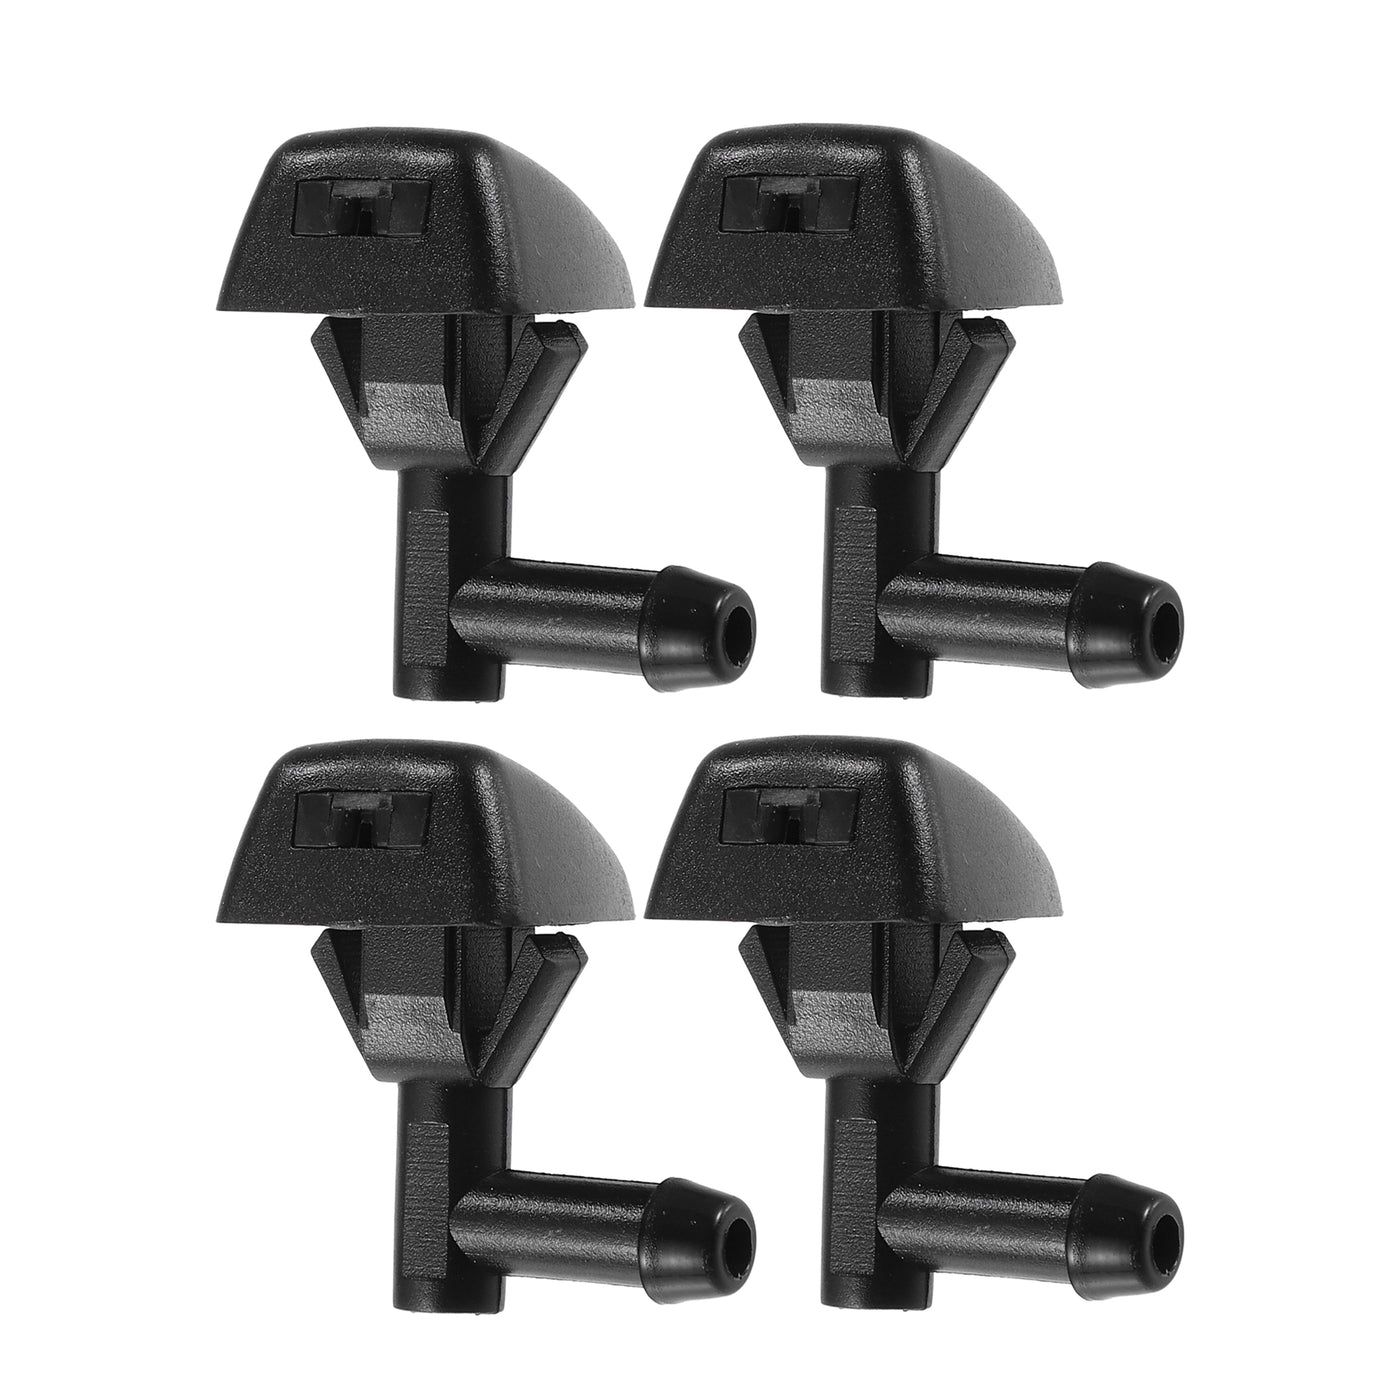 ACROPIX Front Windshield Wiper Washer Nozzle Spray Jet Fit for Volvo S60 for Volvo V70 - Pack of 4 Black